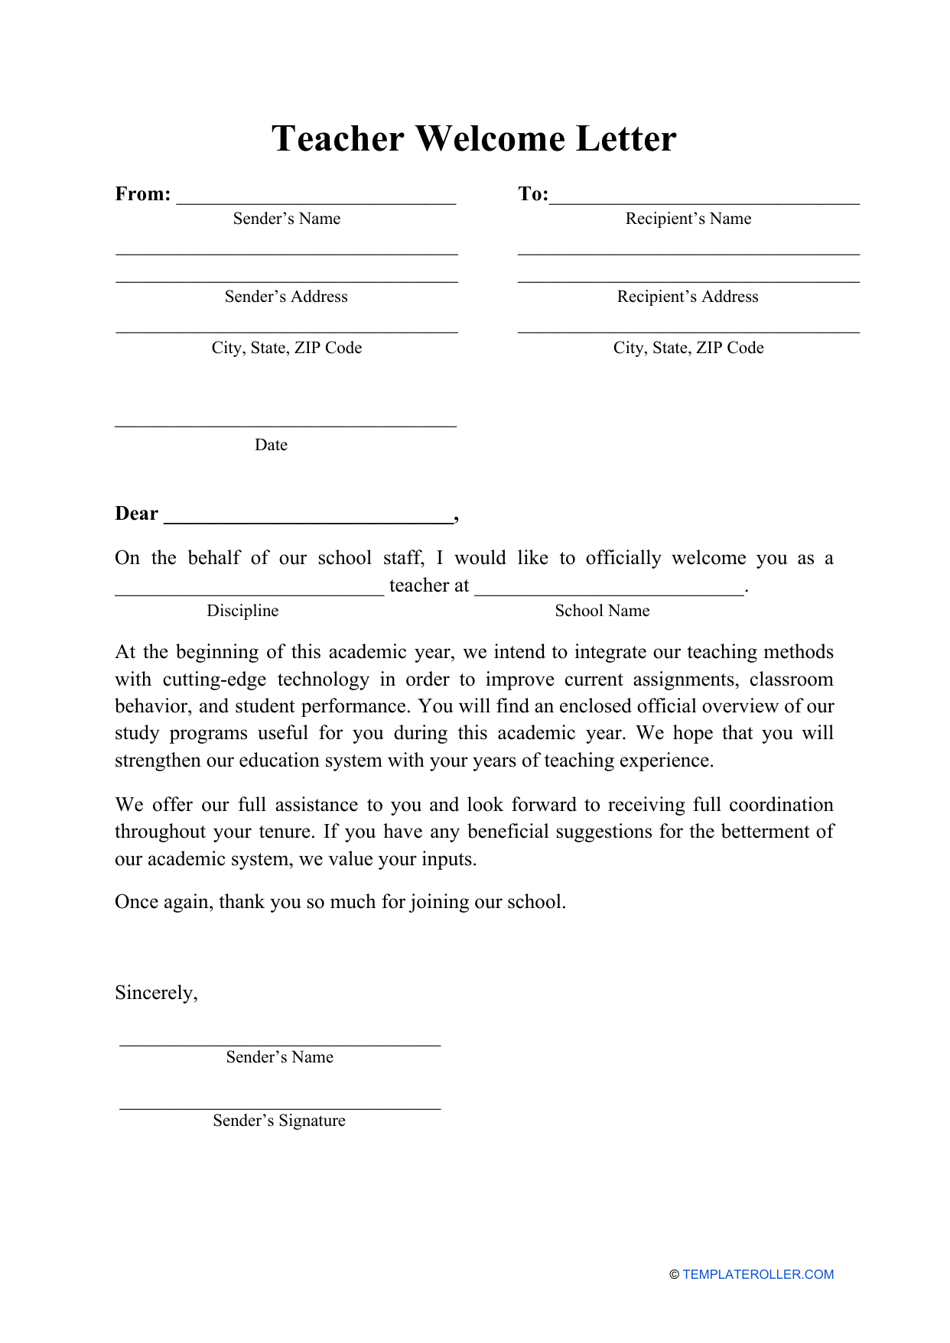 Teacher Welcome Letter Template - Professional customizable letter template for teachers